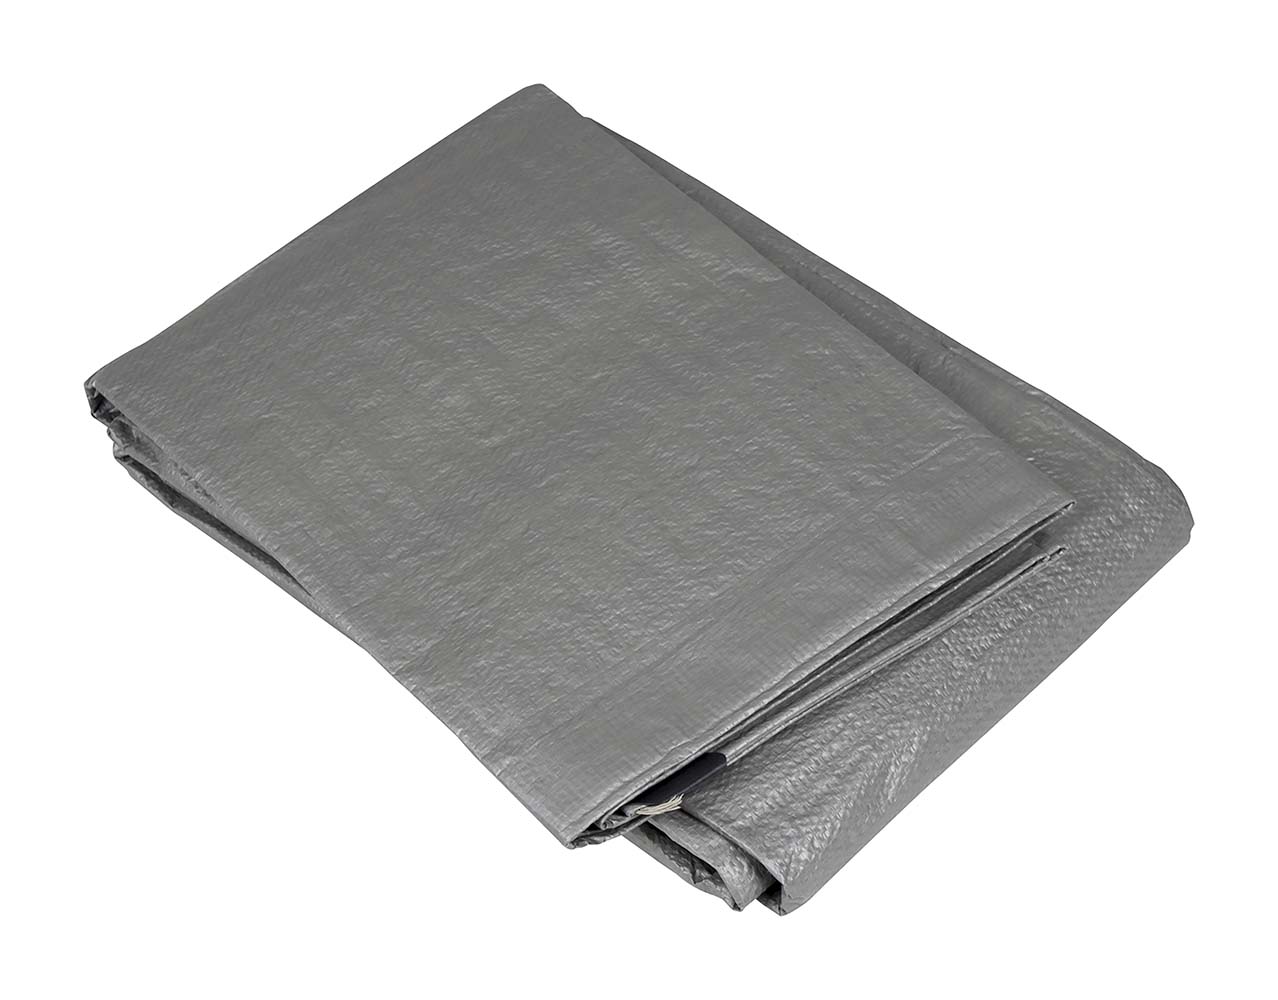 4216000 A sturdy cover sail. This sail is water proof, weather proof and high quality (120 gr/m²). With welded seams, reinforced edges and sturdy eyelets.